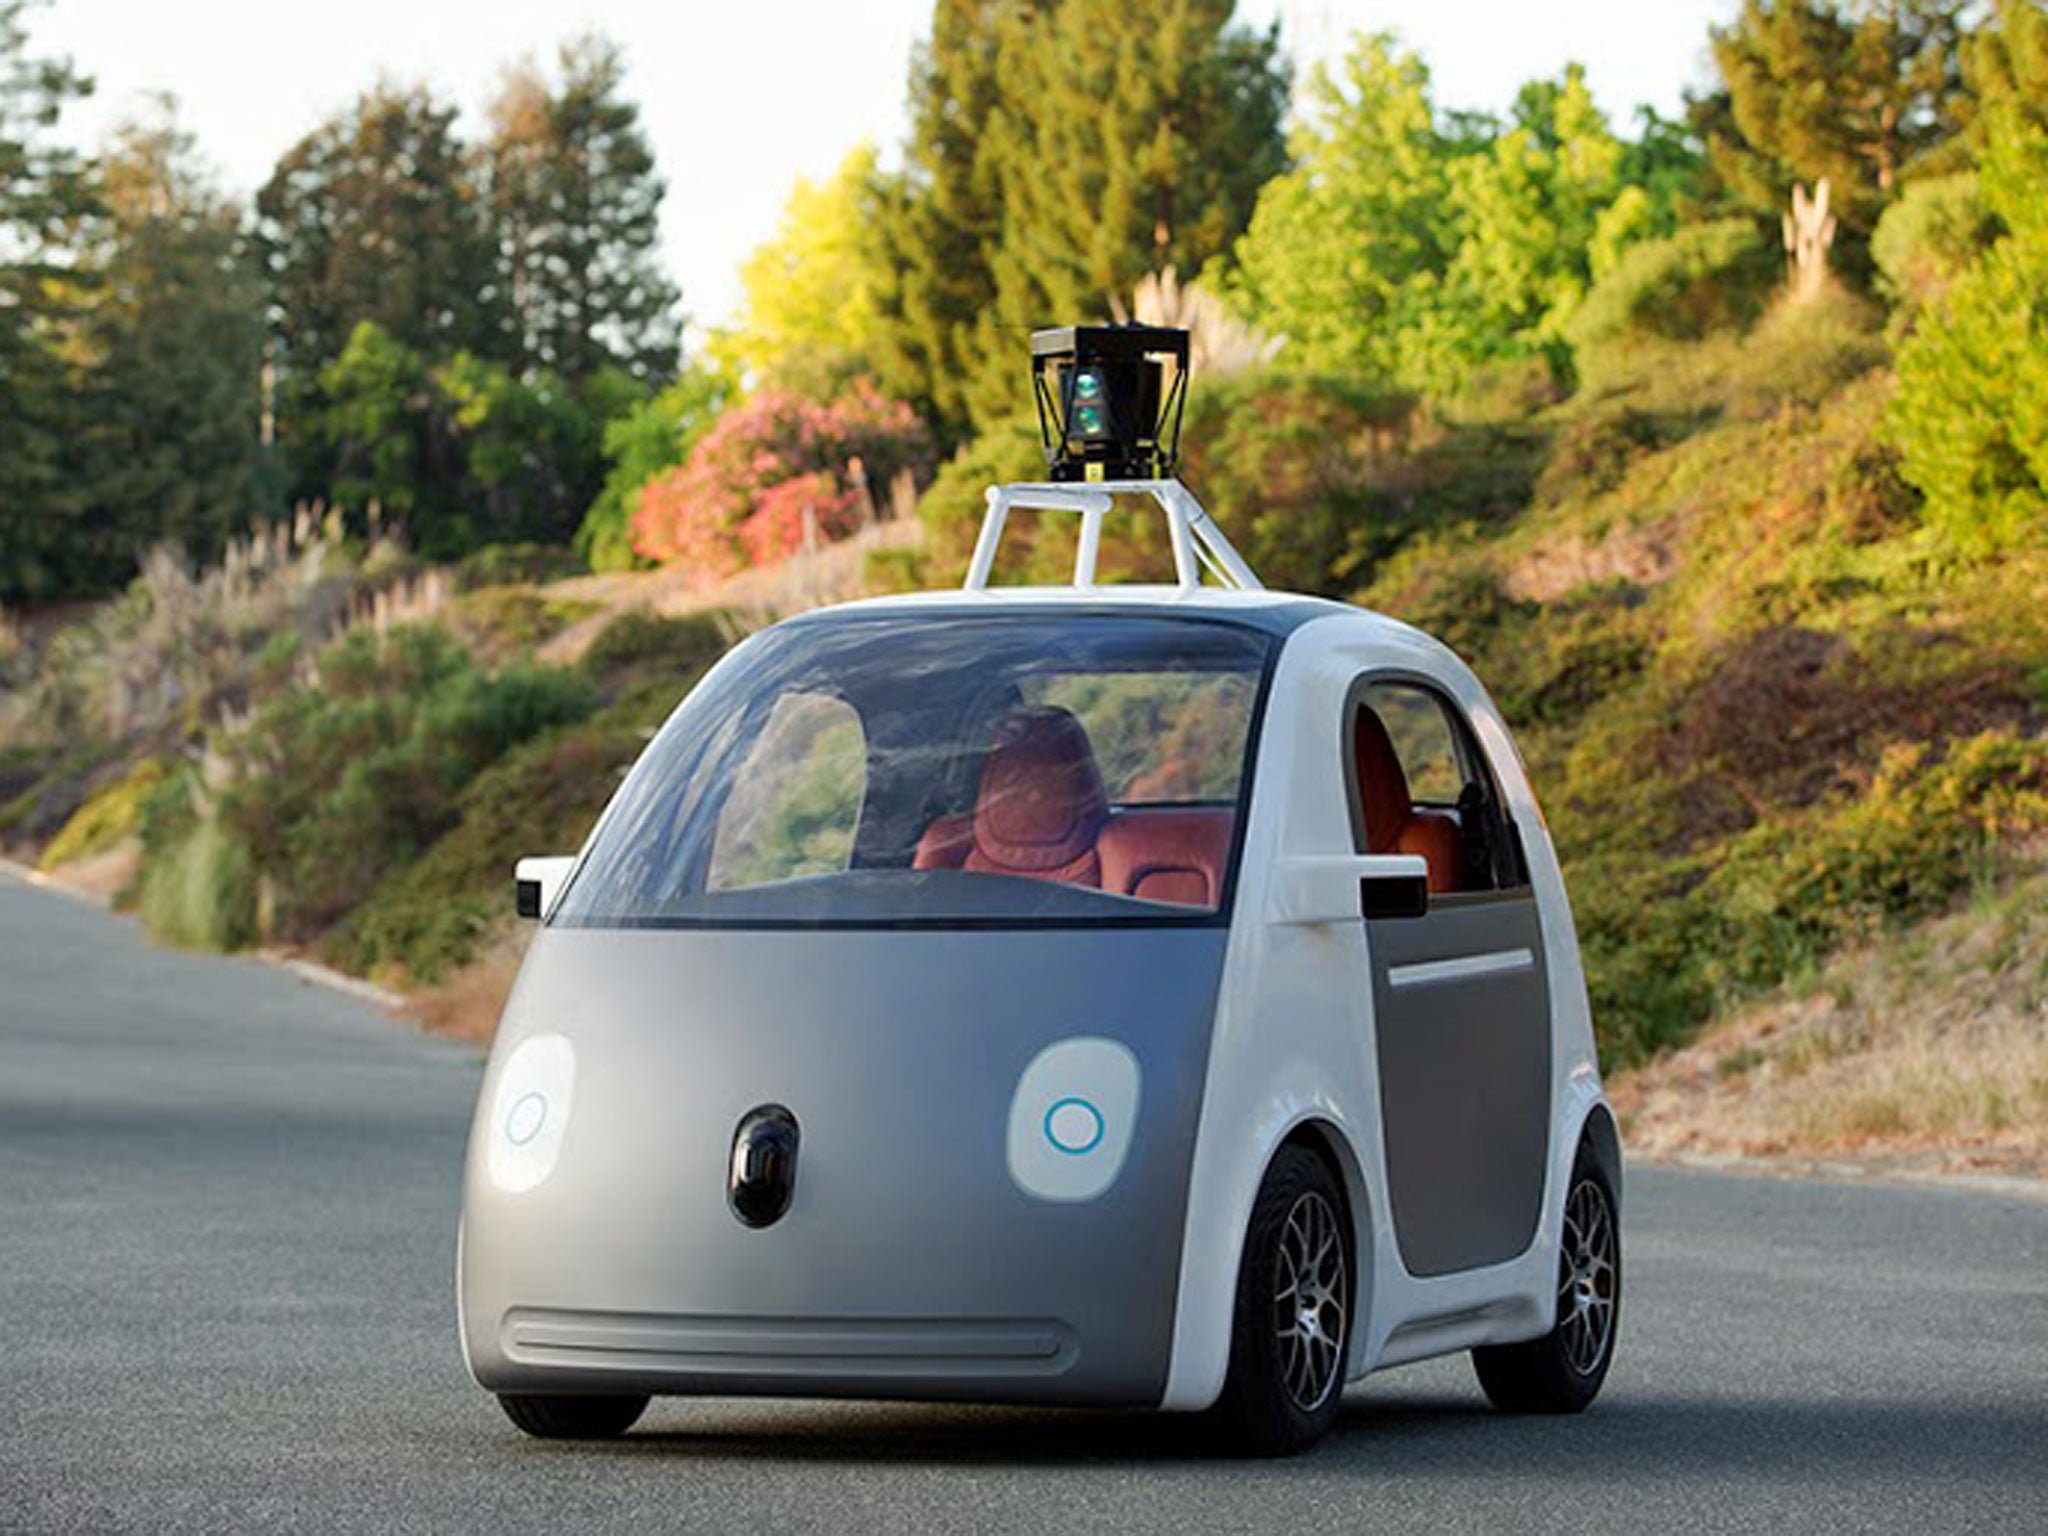 A self-driving car? I’ll belive it when I see it